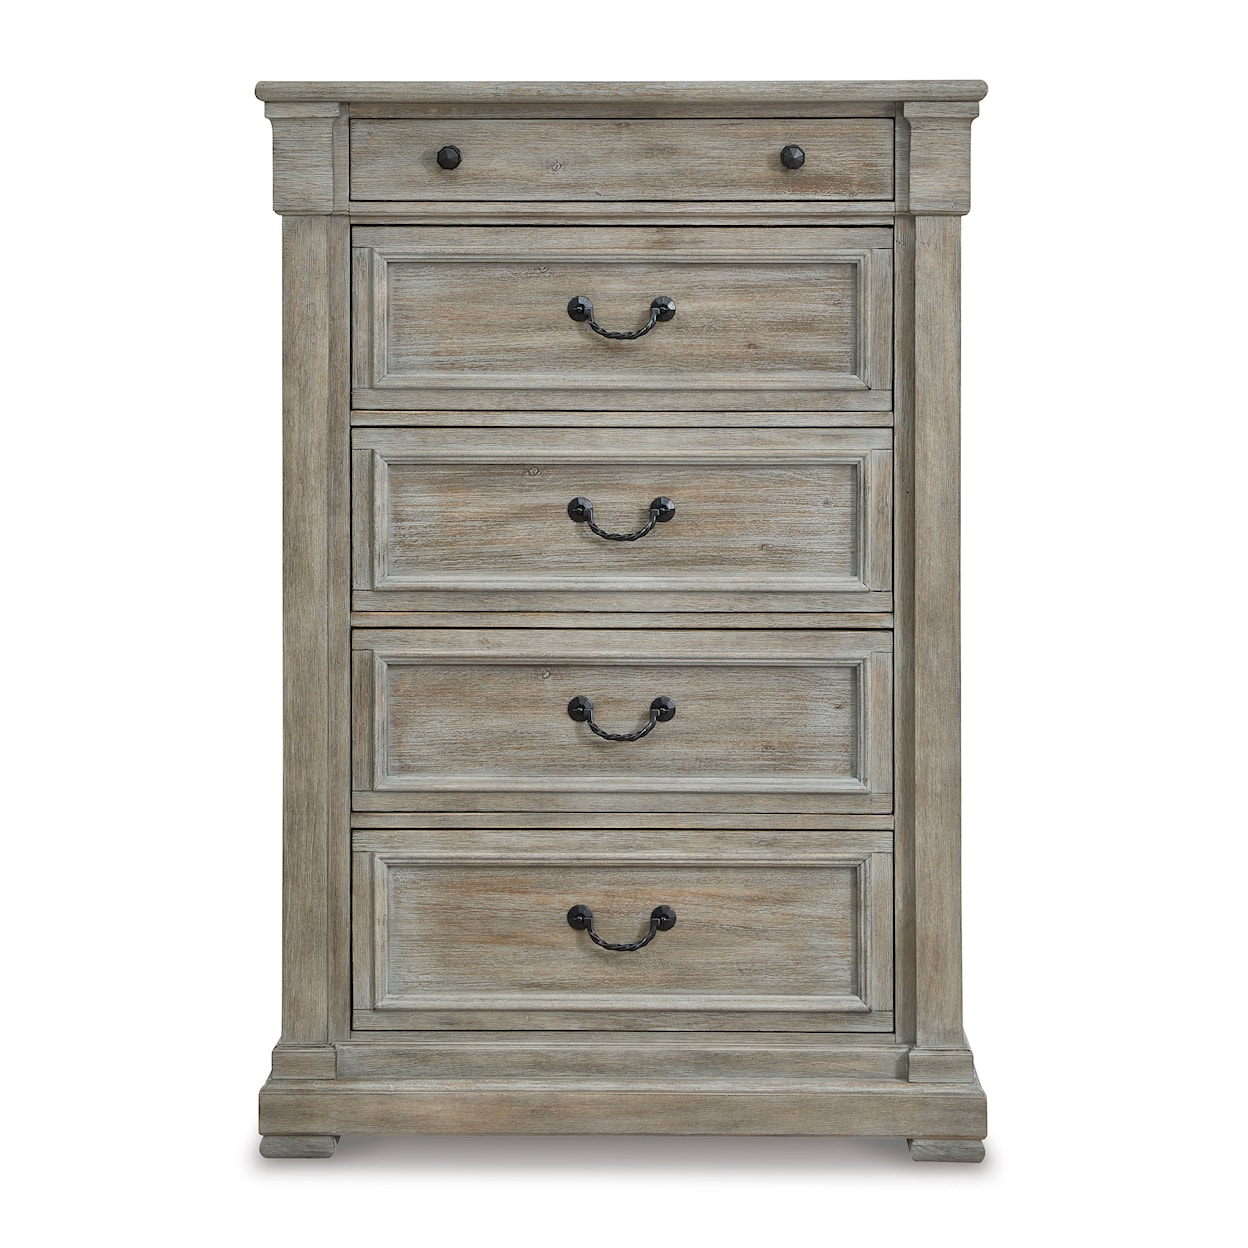 Benchcraft Moreshire Chest of Drawers